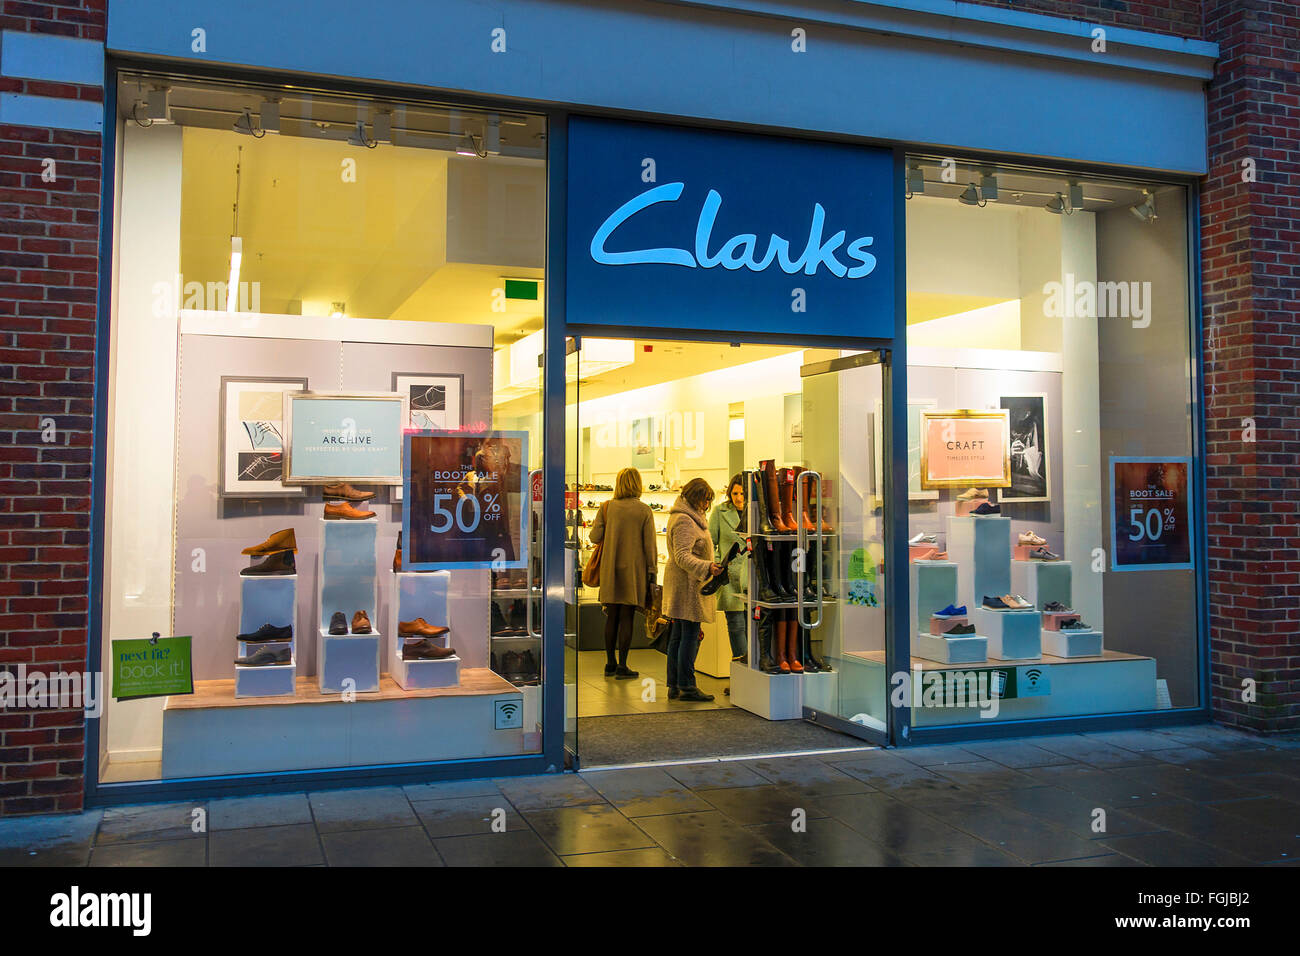 Clarks Chaussures Bottes Grand Magasin Magasin de chaussures Photo Stock -  Alamy